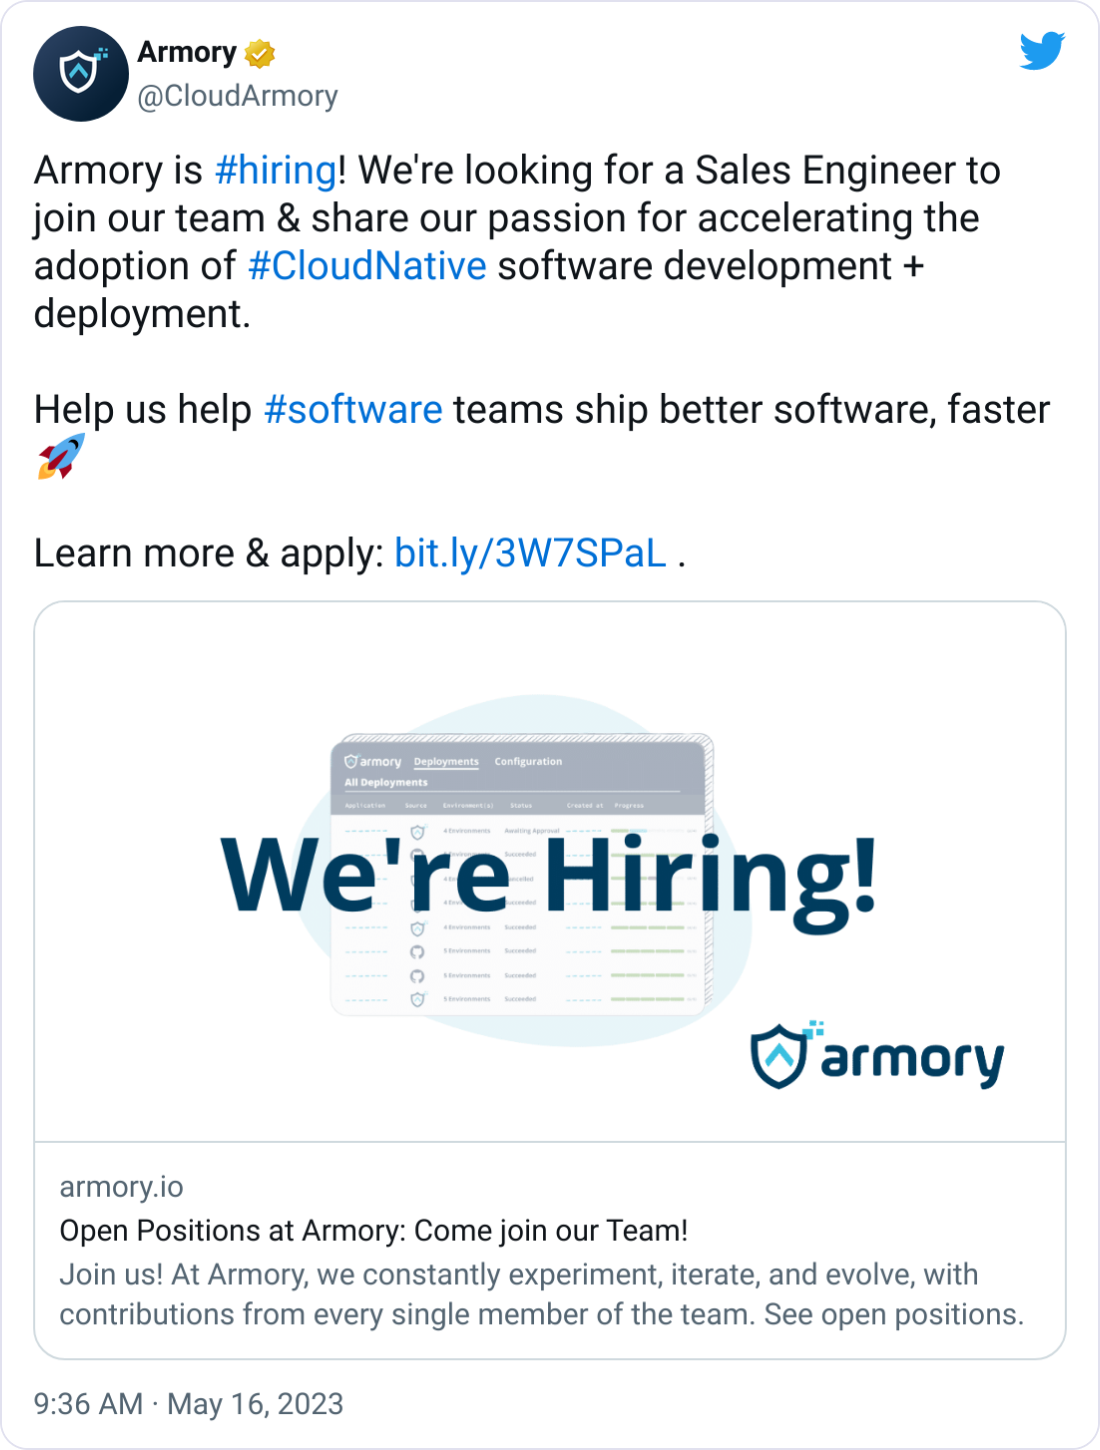 Armory @CloudArmory Armory is #hiring! We're looking for a Sales Engineer to join our team & share our passion for accelerating the adoption of #CloudNative software development + deployment.  Help us help #software teams ship better software, faster 🚀  Learn more & apply: https://bit.ly/3W7SPaL .